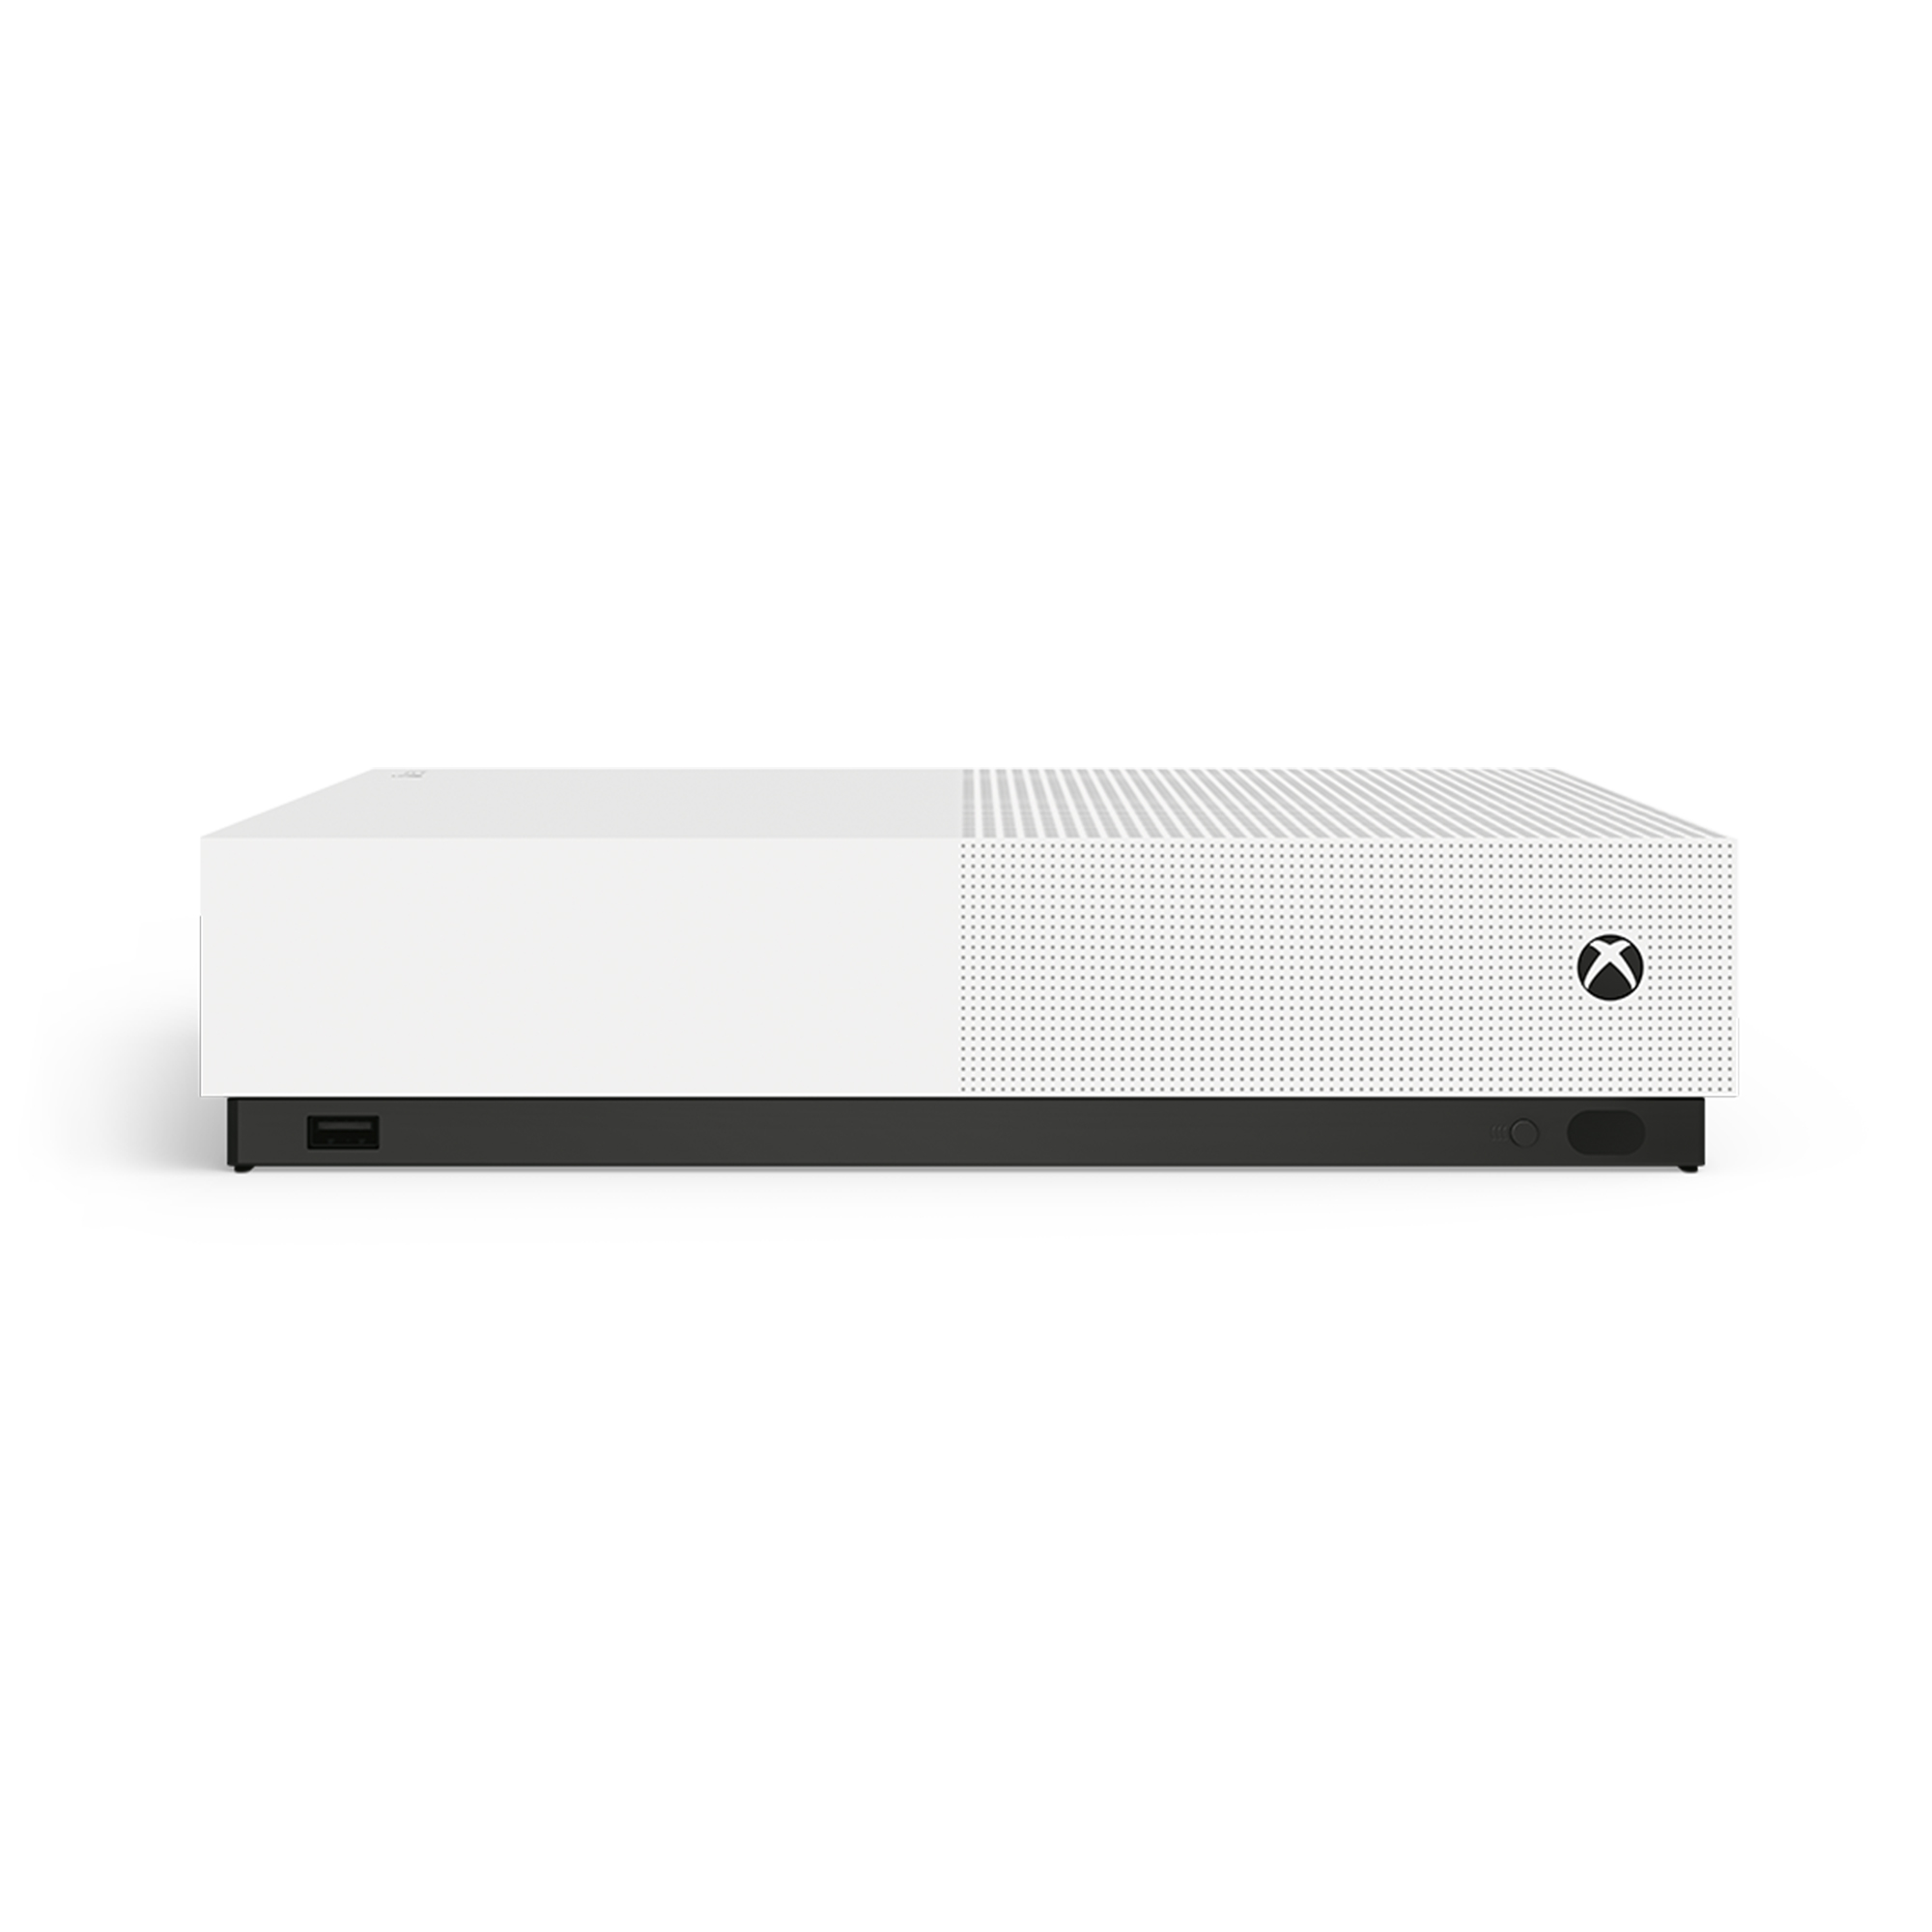 Microsoft Xbox One S 1TB All Digital Edition 3 Game Bundle (Disc-free Gaming), White, NJP-00050 - image 8 of 13